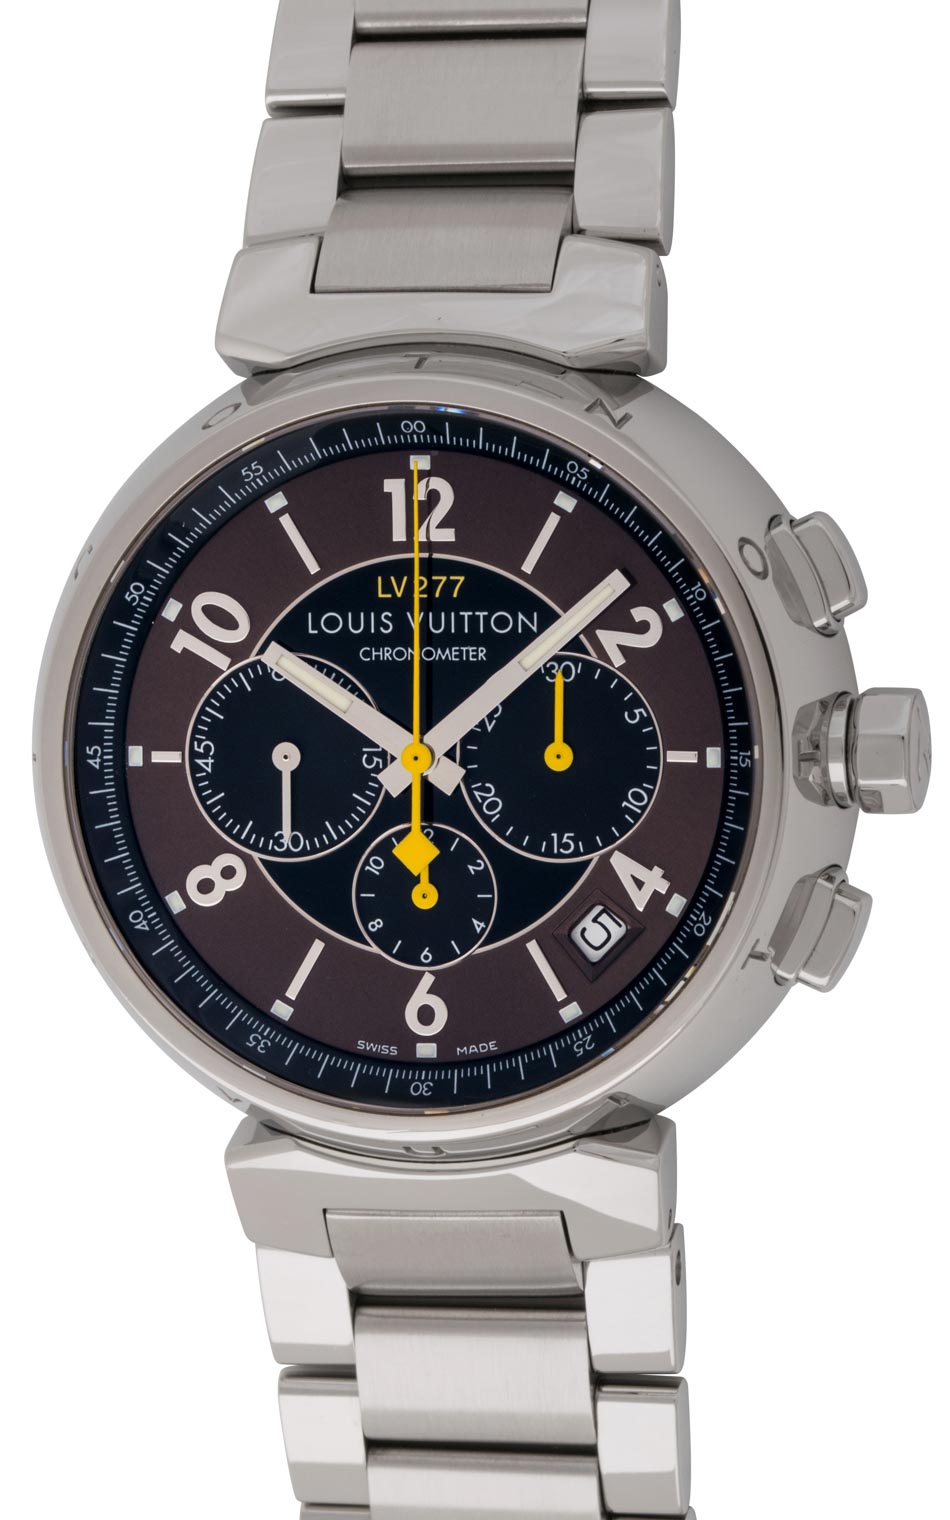 Louis Vuitton Tambour Automatic Chronograph Watch LV277 at 1stDibs